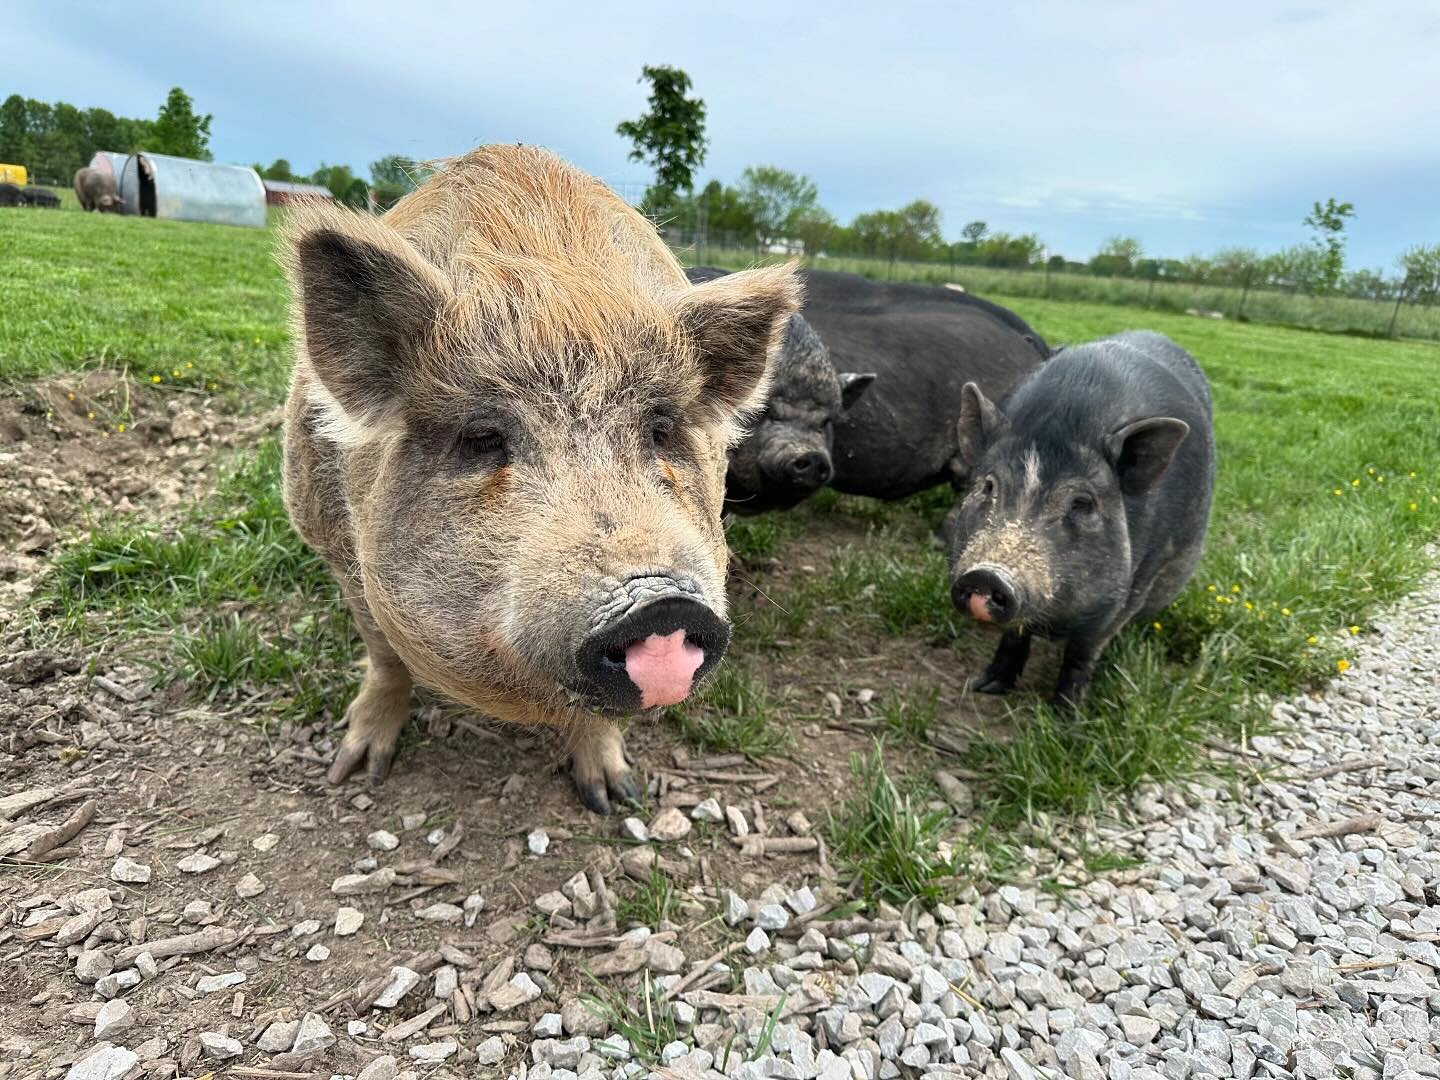 It&rsquo;s a beautiful weekend to visit the pigs! We&rsquo;re open this weekend, Saturday and Sunday from 11am-2:30pm. We take our last visitor 30 minutes before we close. Visiting the sanctuary is a wonderful opportunity to meet and connect with the